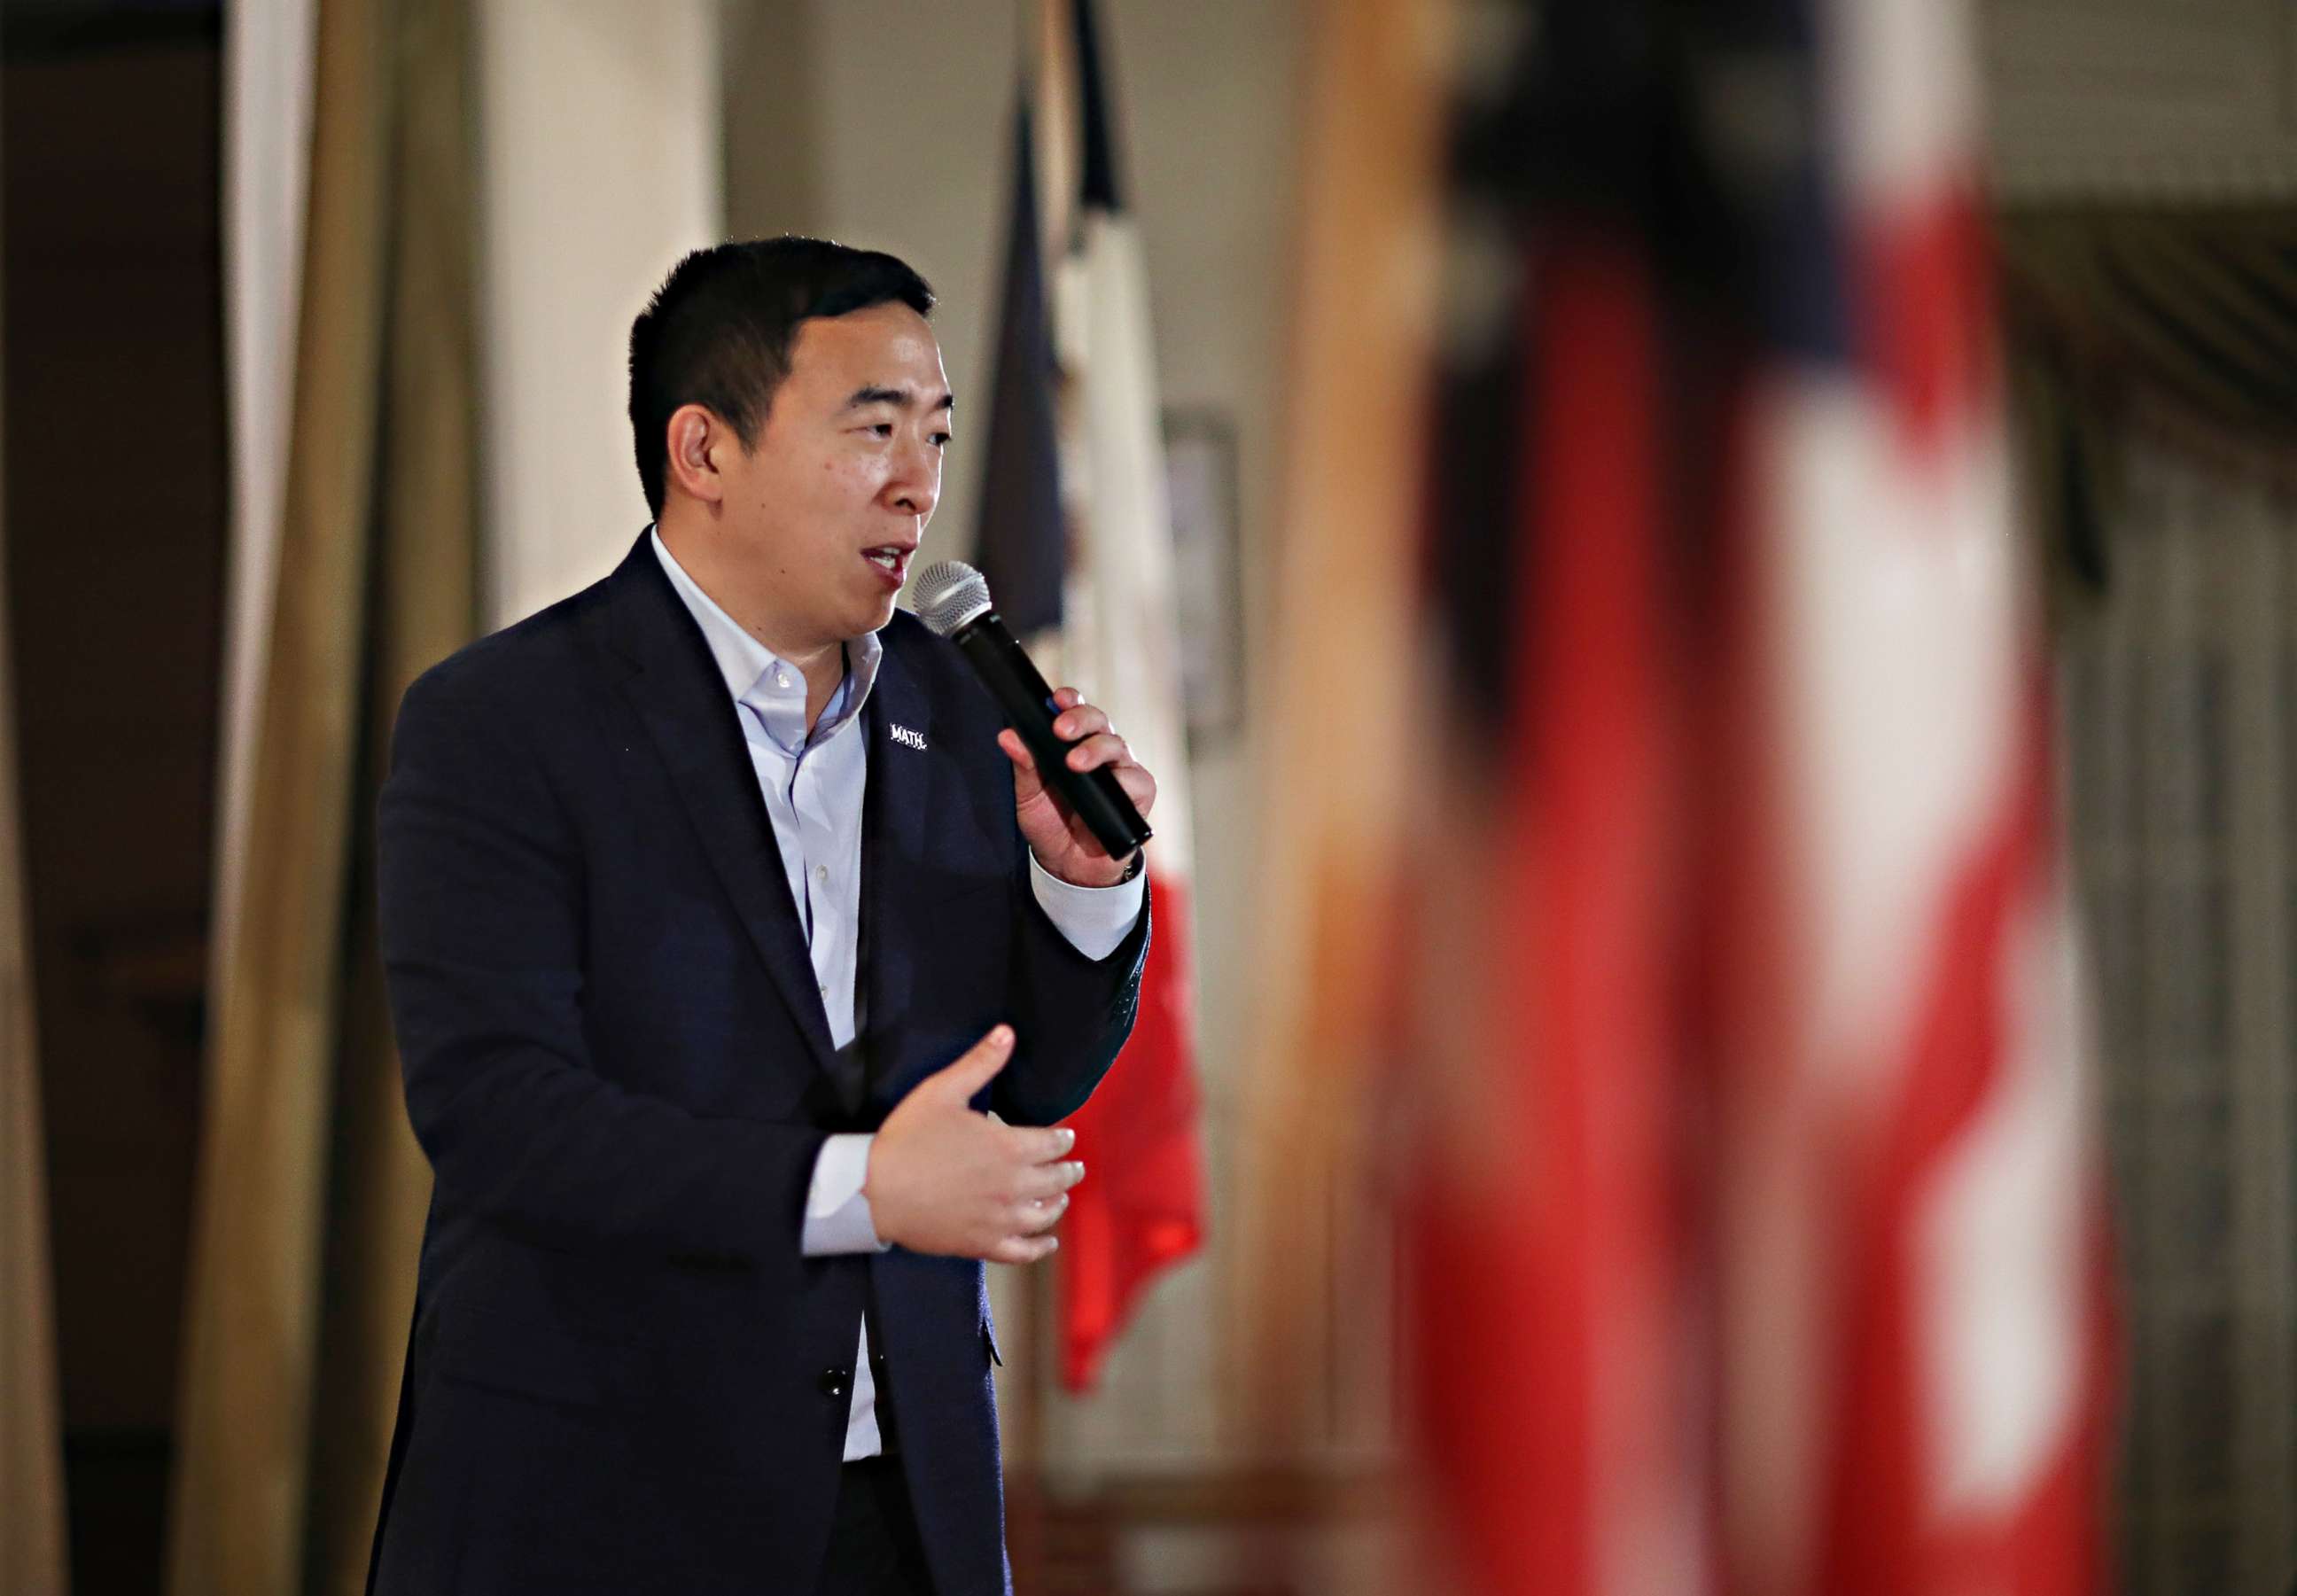 PHOTO: Democratic presidential candidate Andrew Yang speaks during a campaign event at the Cedar Falls Woman's Club on Jan. 30, 2020, in Cedar Falls, Iowa. Iowa's first-in-the-nation caucuses will be held on February 3.